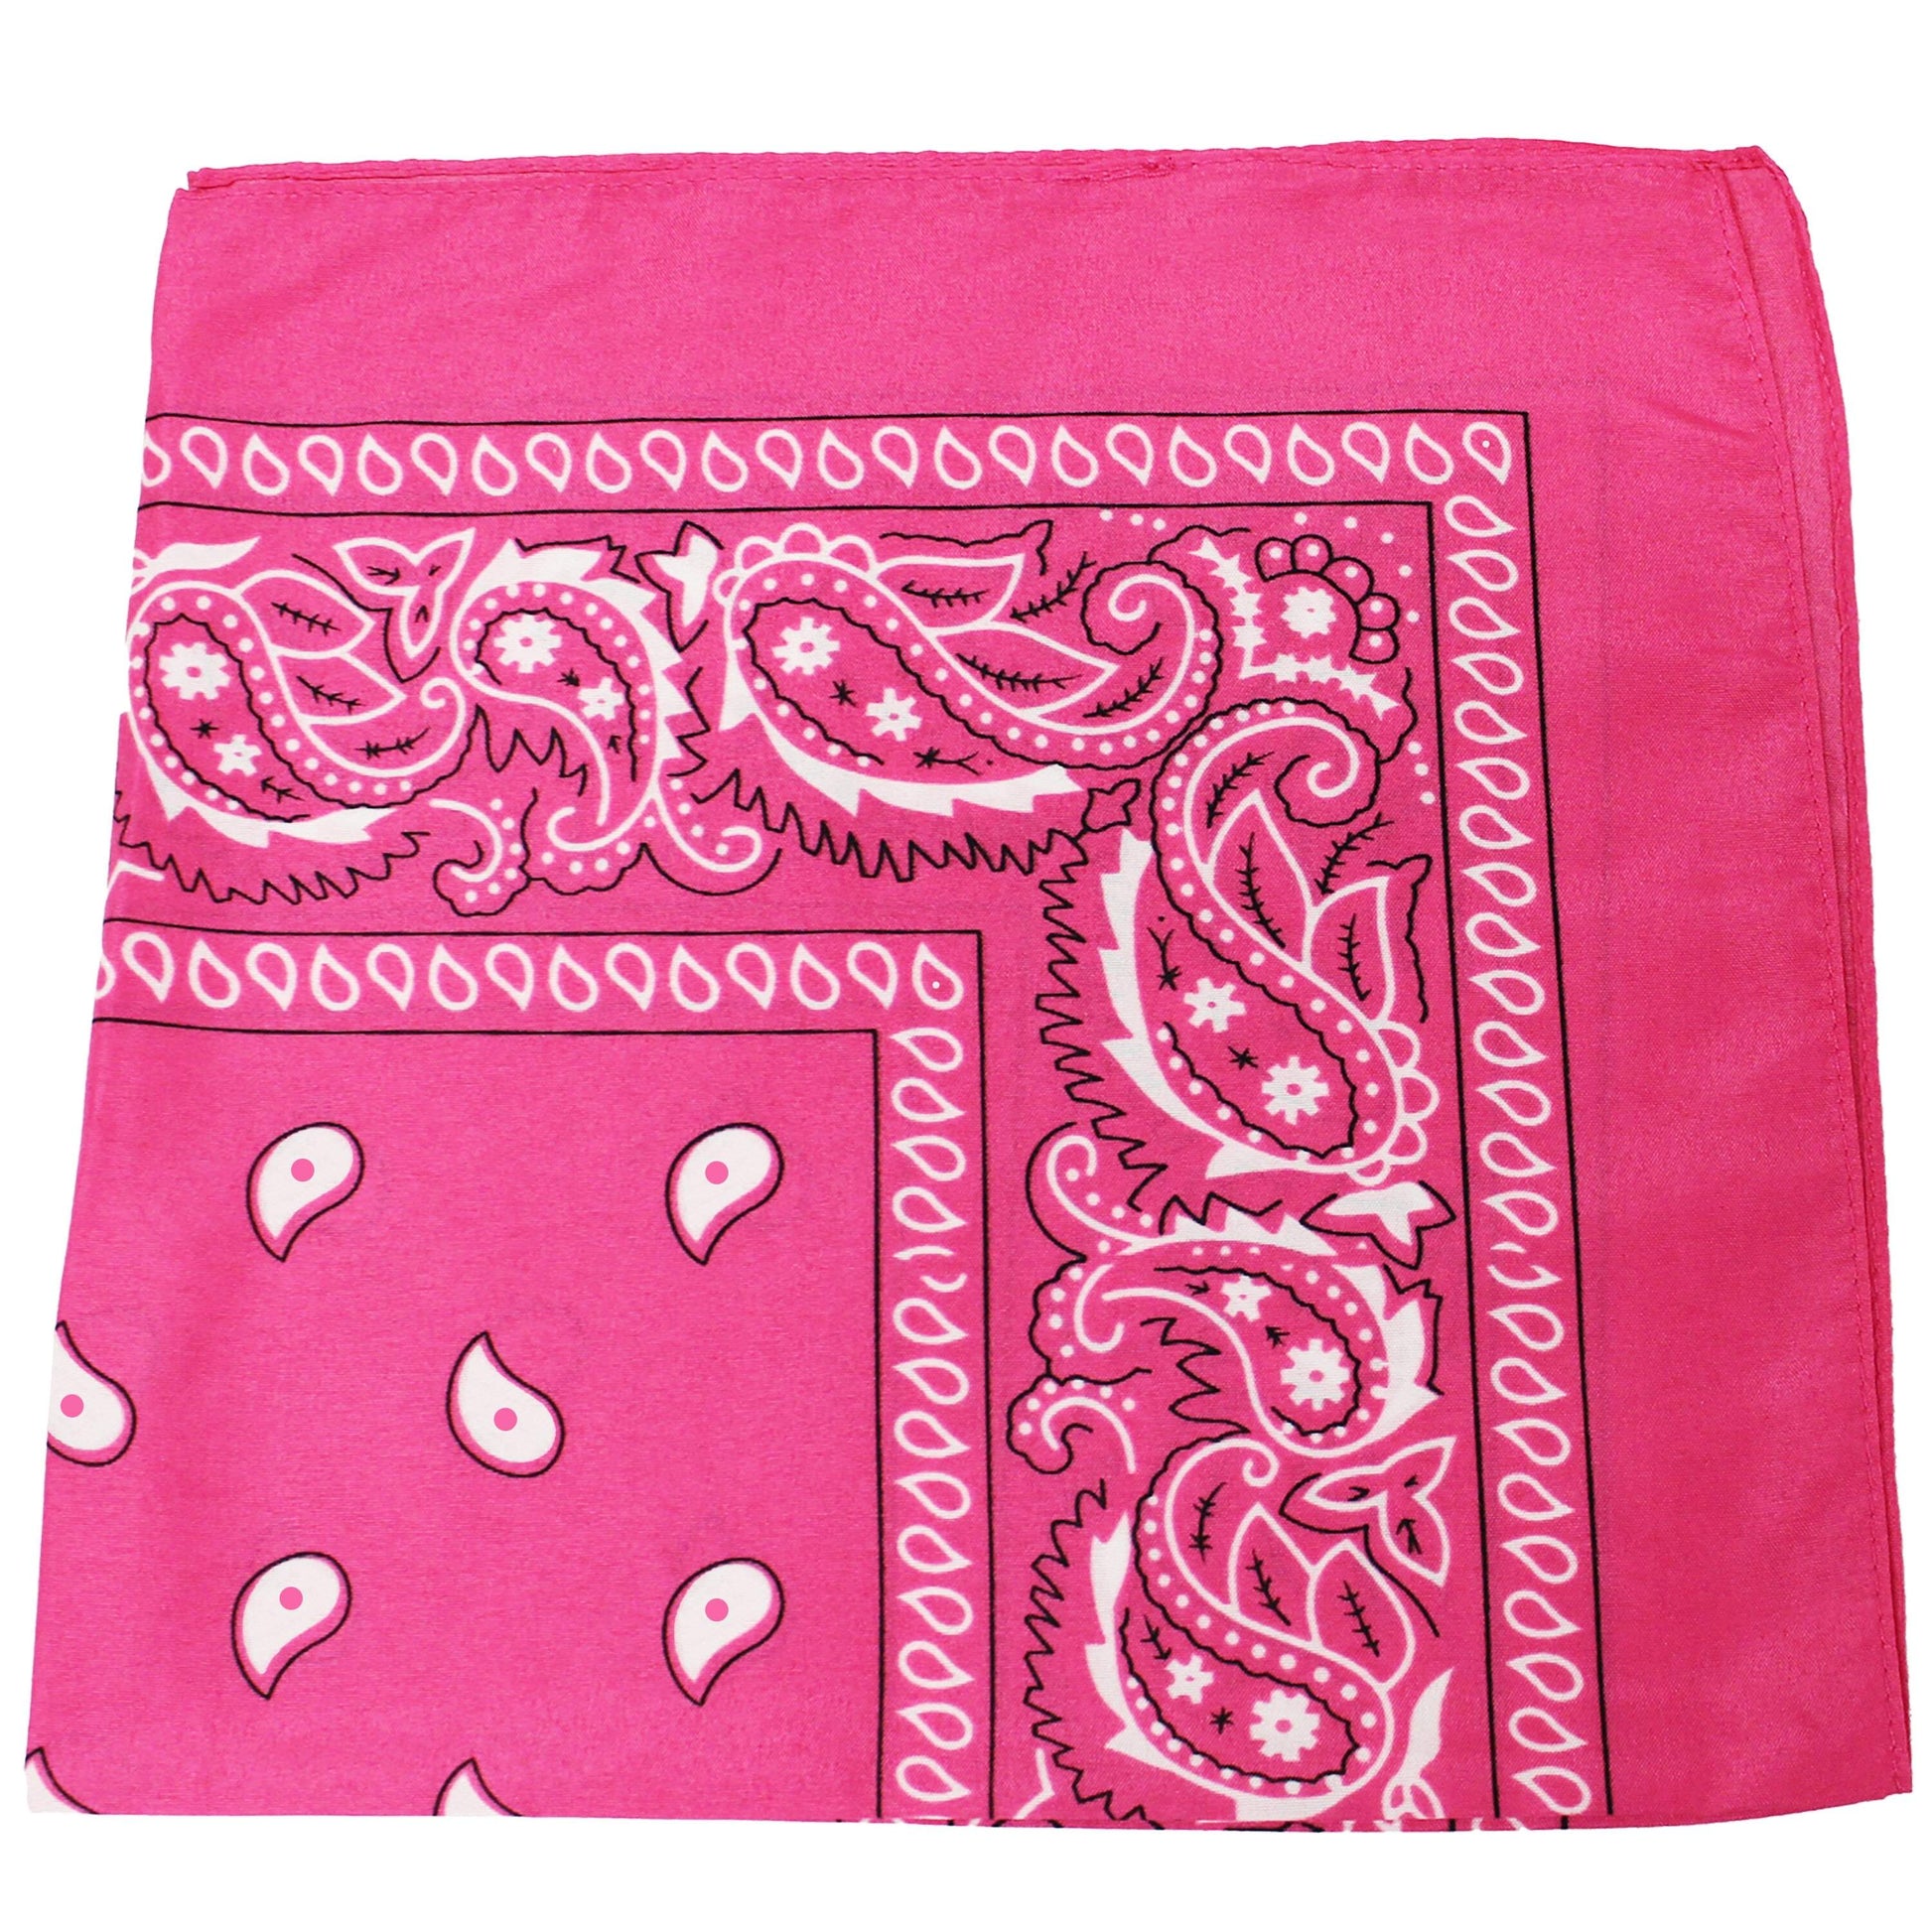 Qraftsy Cotton Bandana - Paisley and Solid Colors Available - 12 Pack